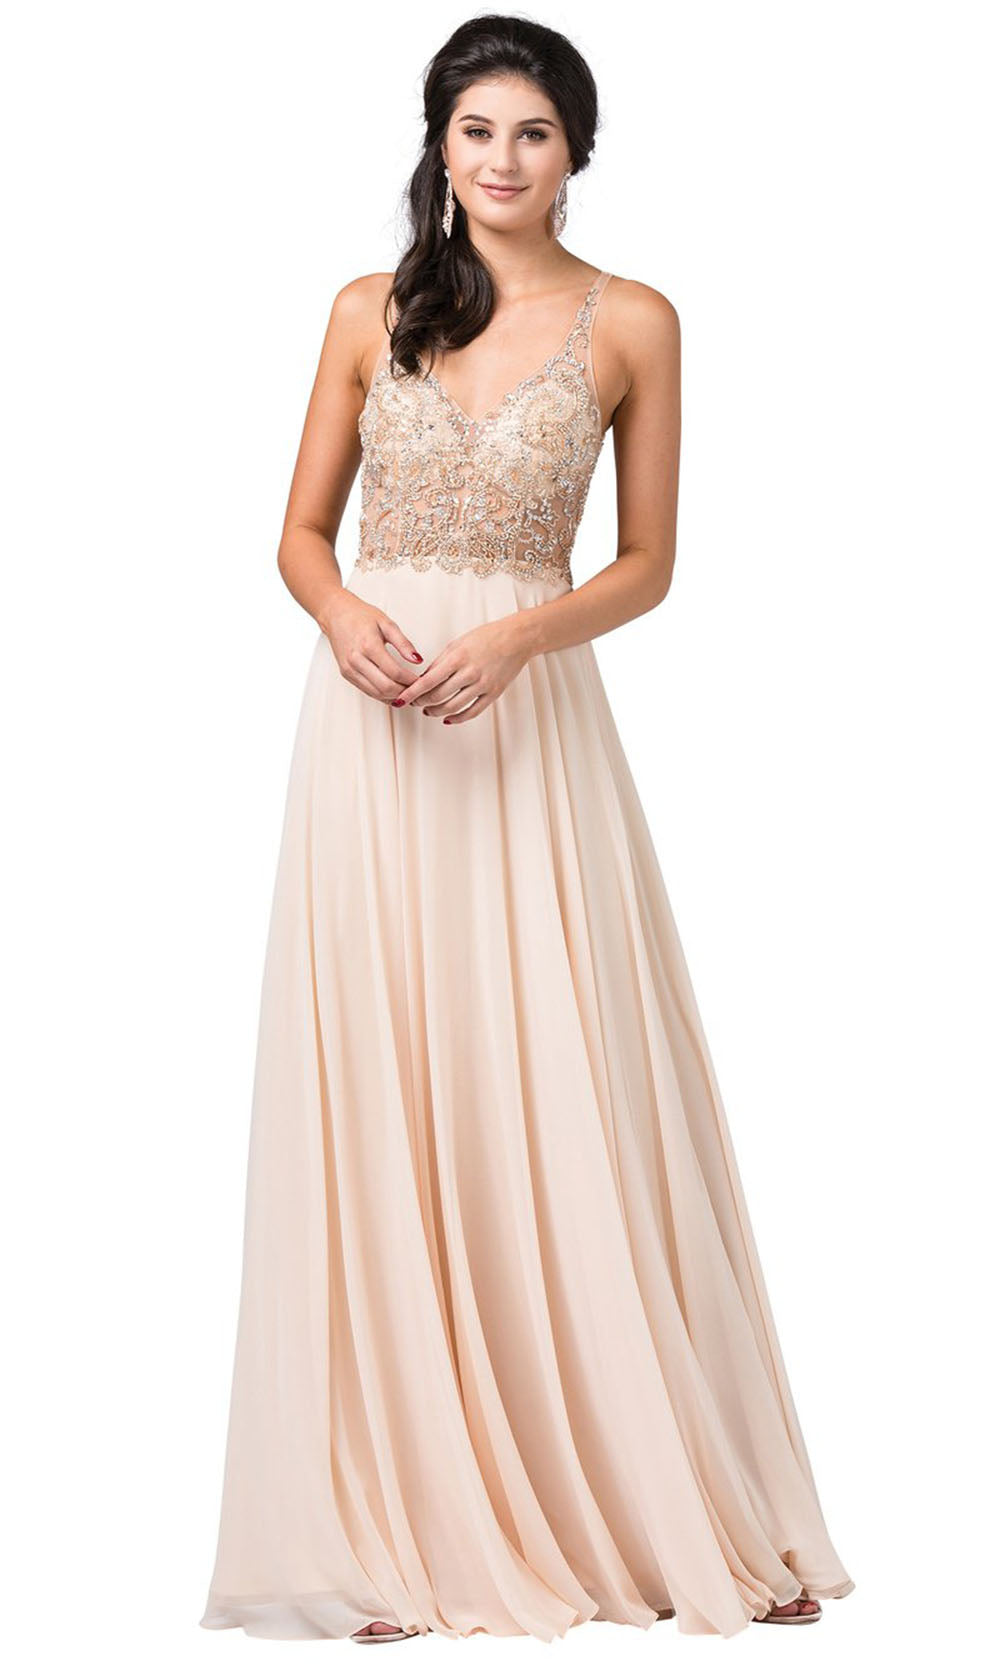 Dancing Queen - 2513 Beaded V Neck A-Line Dress In Neutral